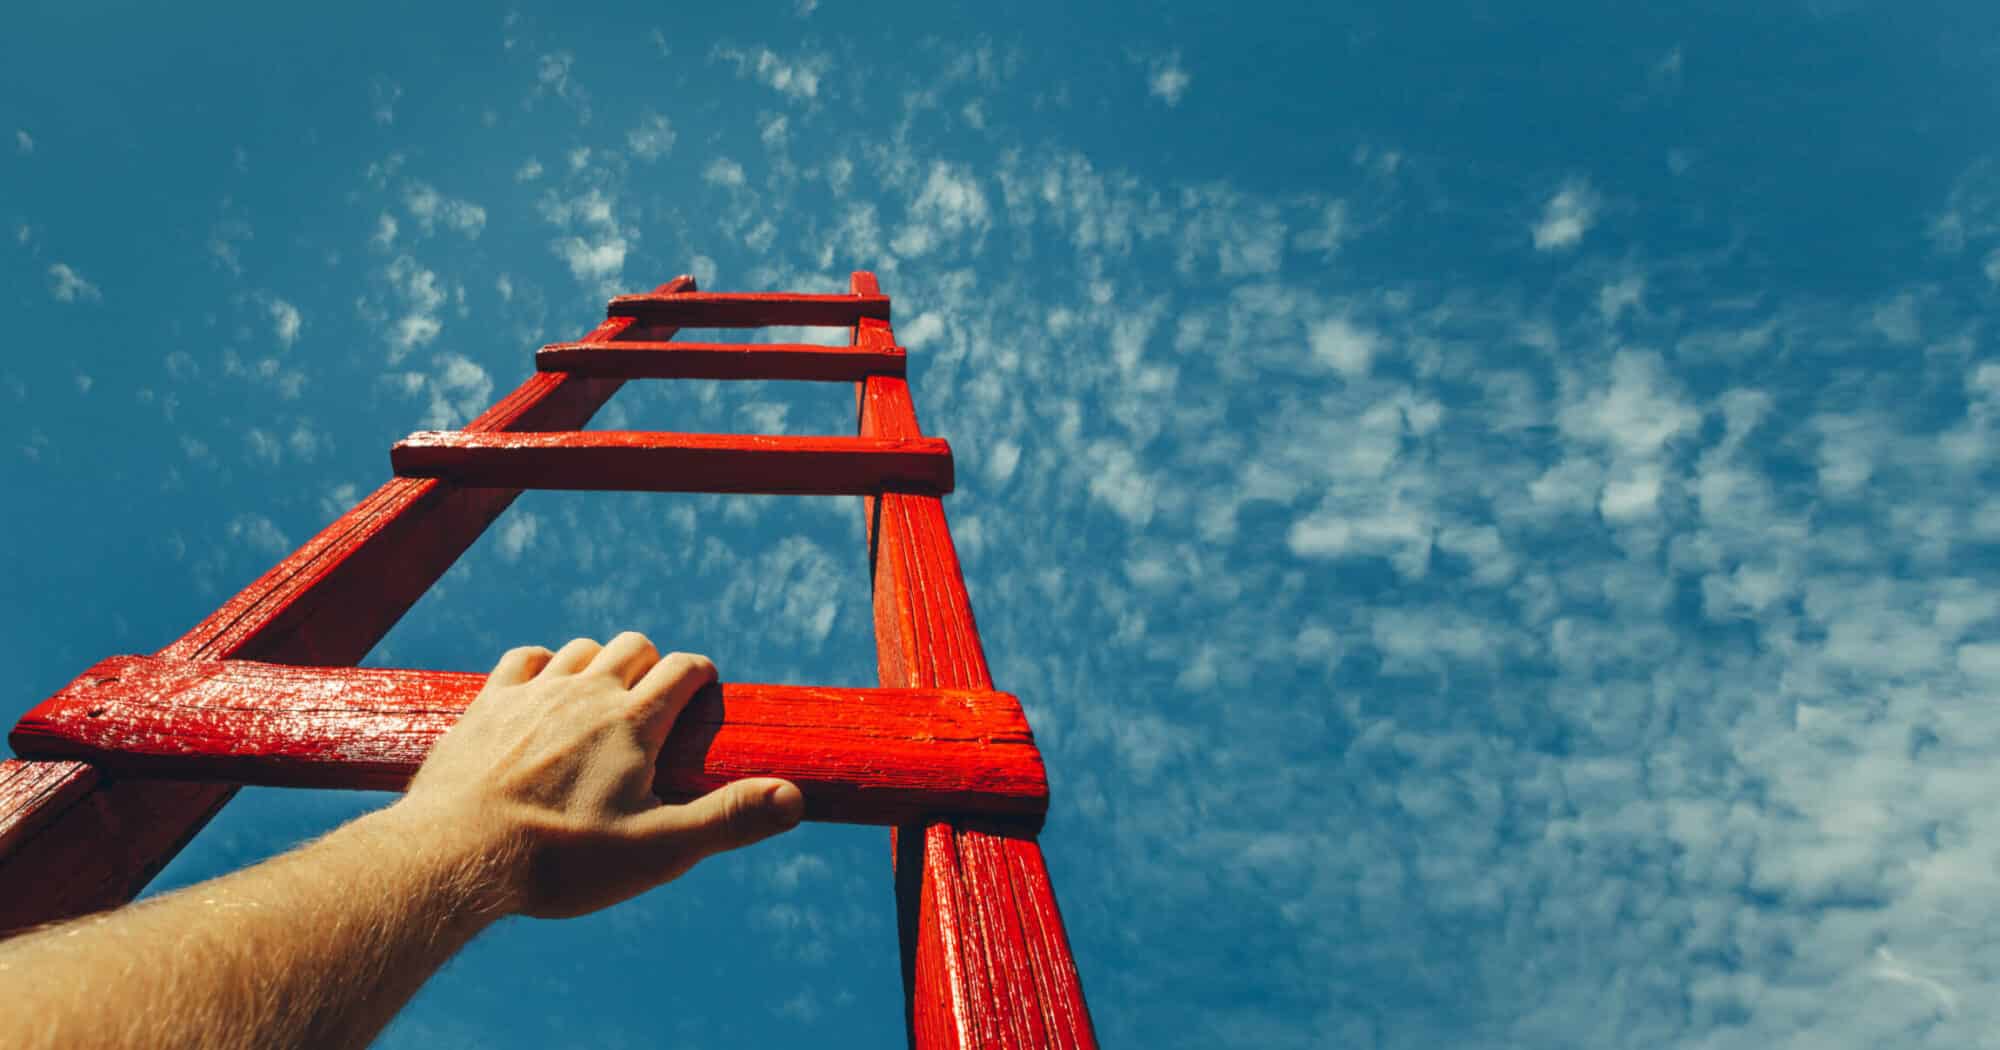 A hand on a red ladder pointed toward the sky.